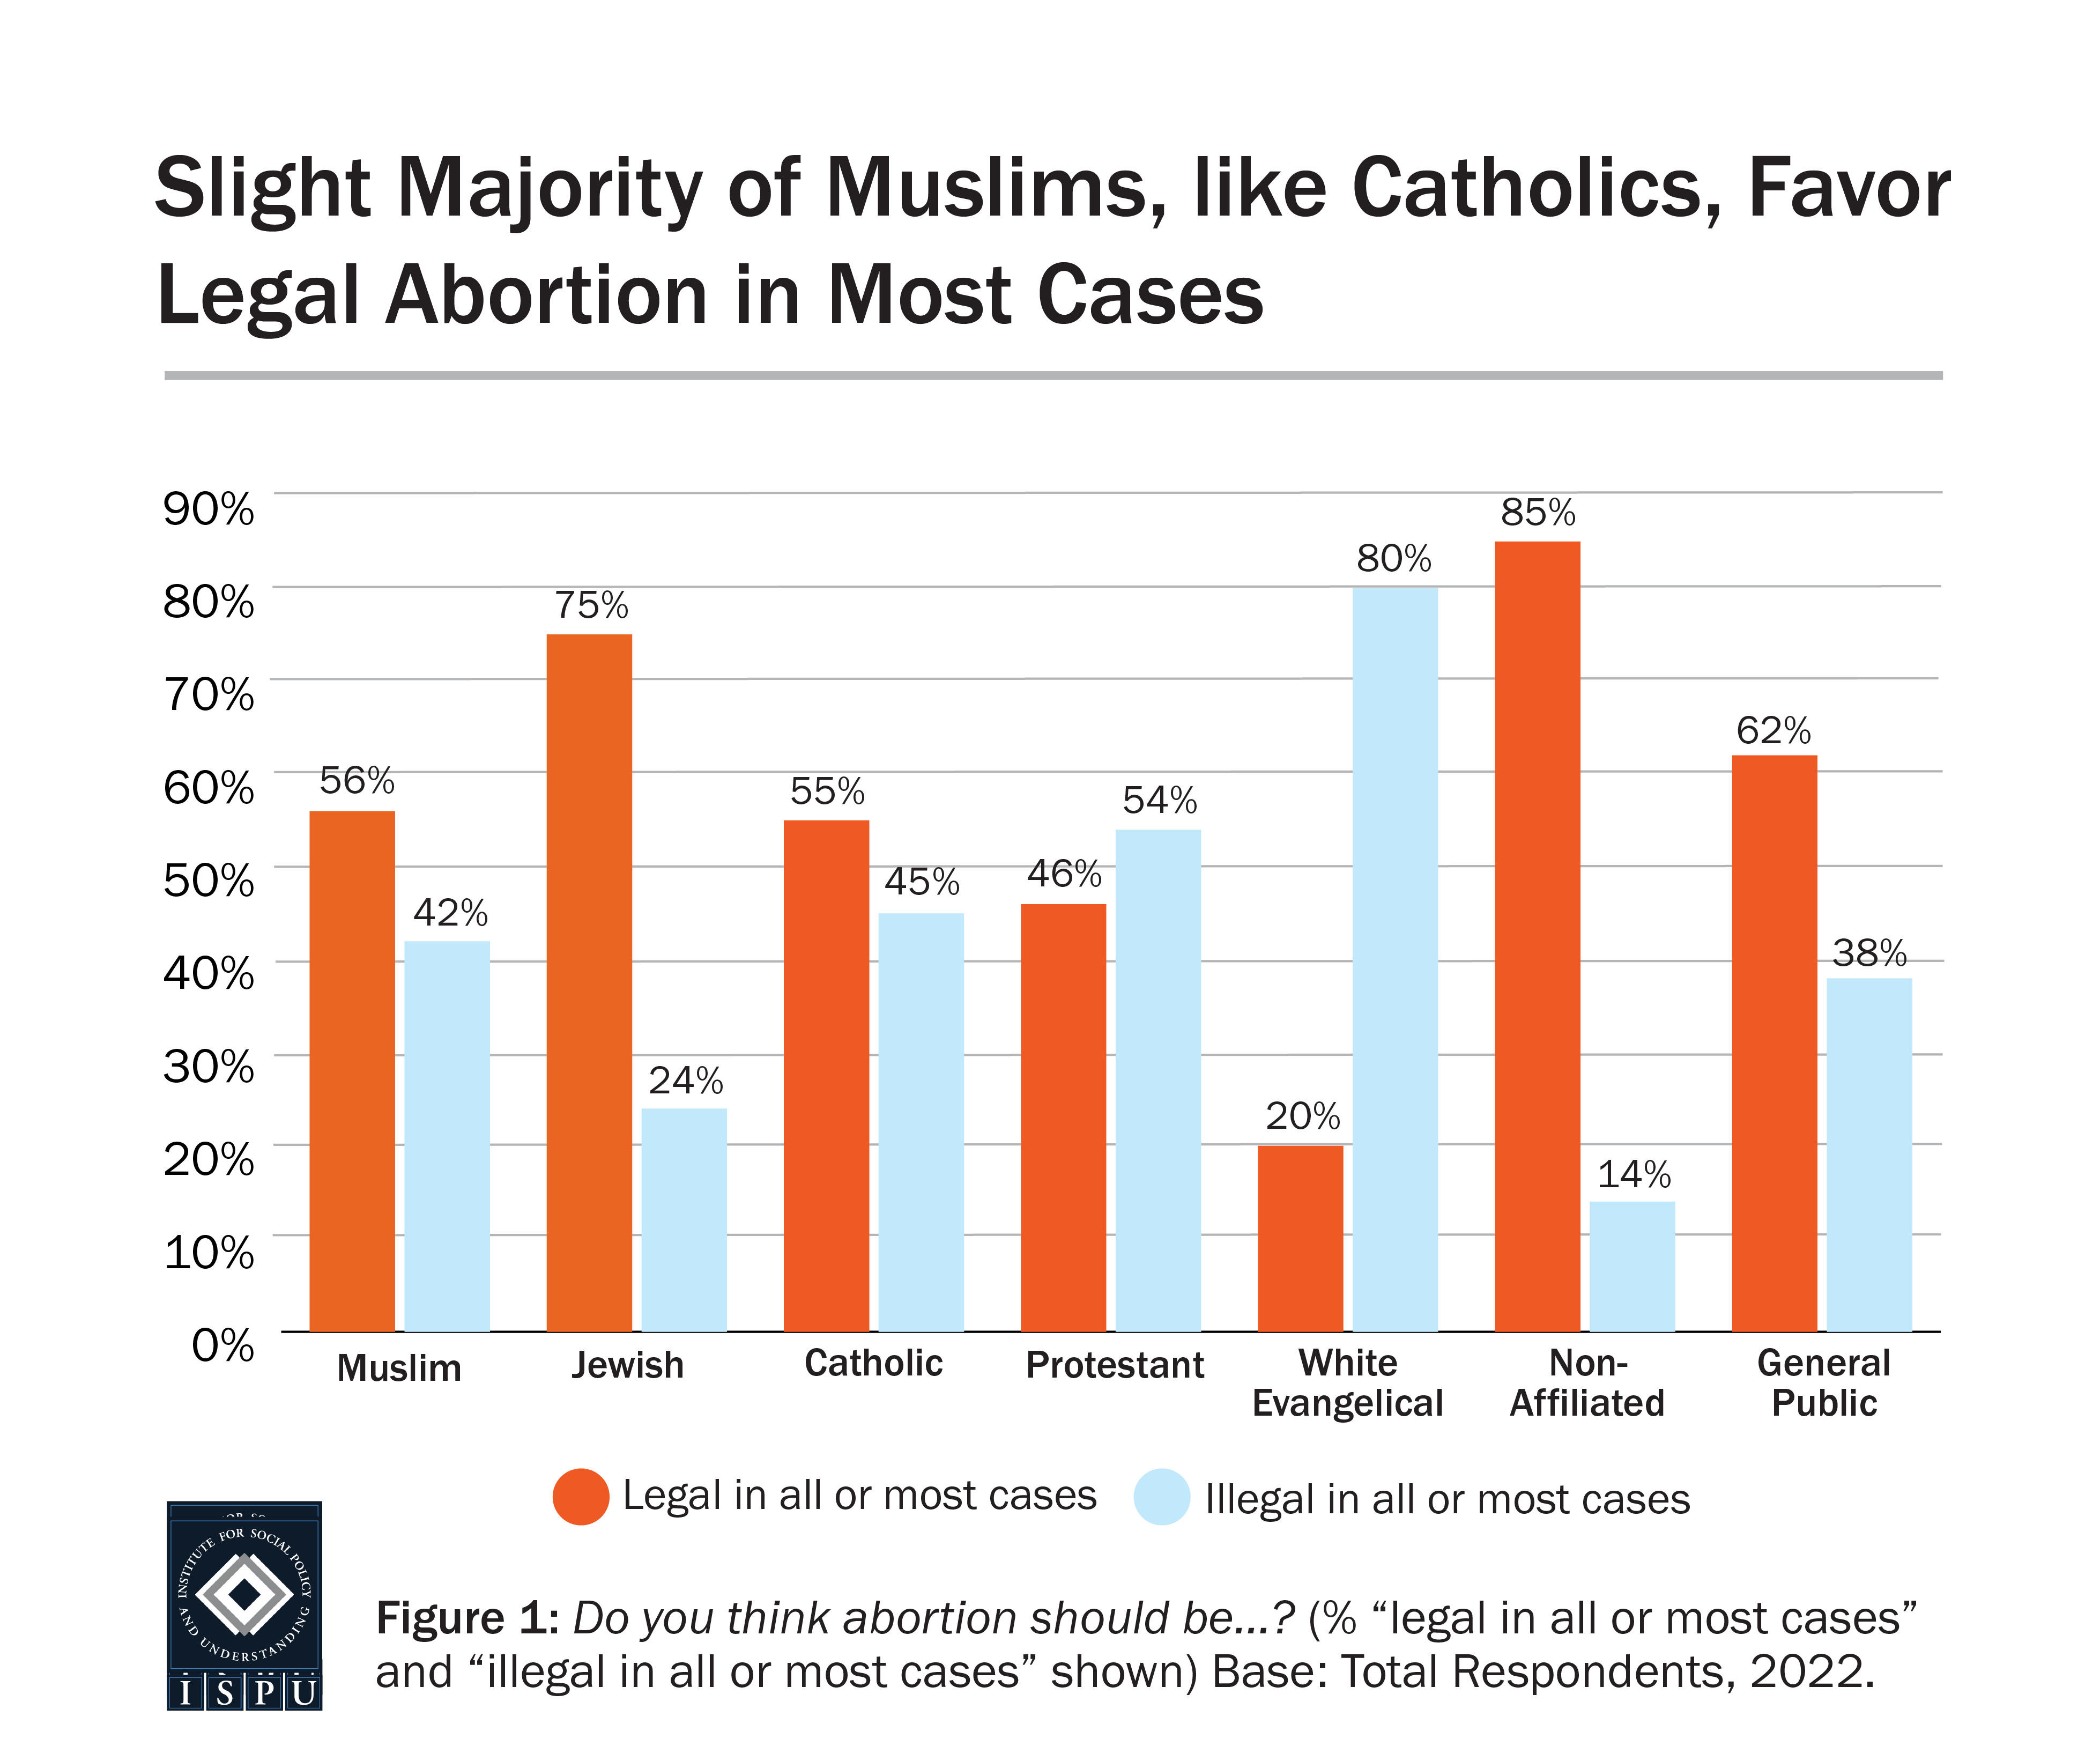 Graph displaying: The majority of Muslims, alongside Catholics, Jews, and the non-affiliated, believe that abortion should be legal in all or most cases.